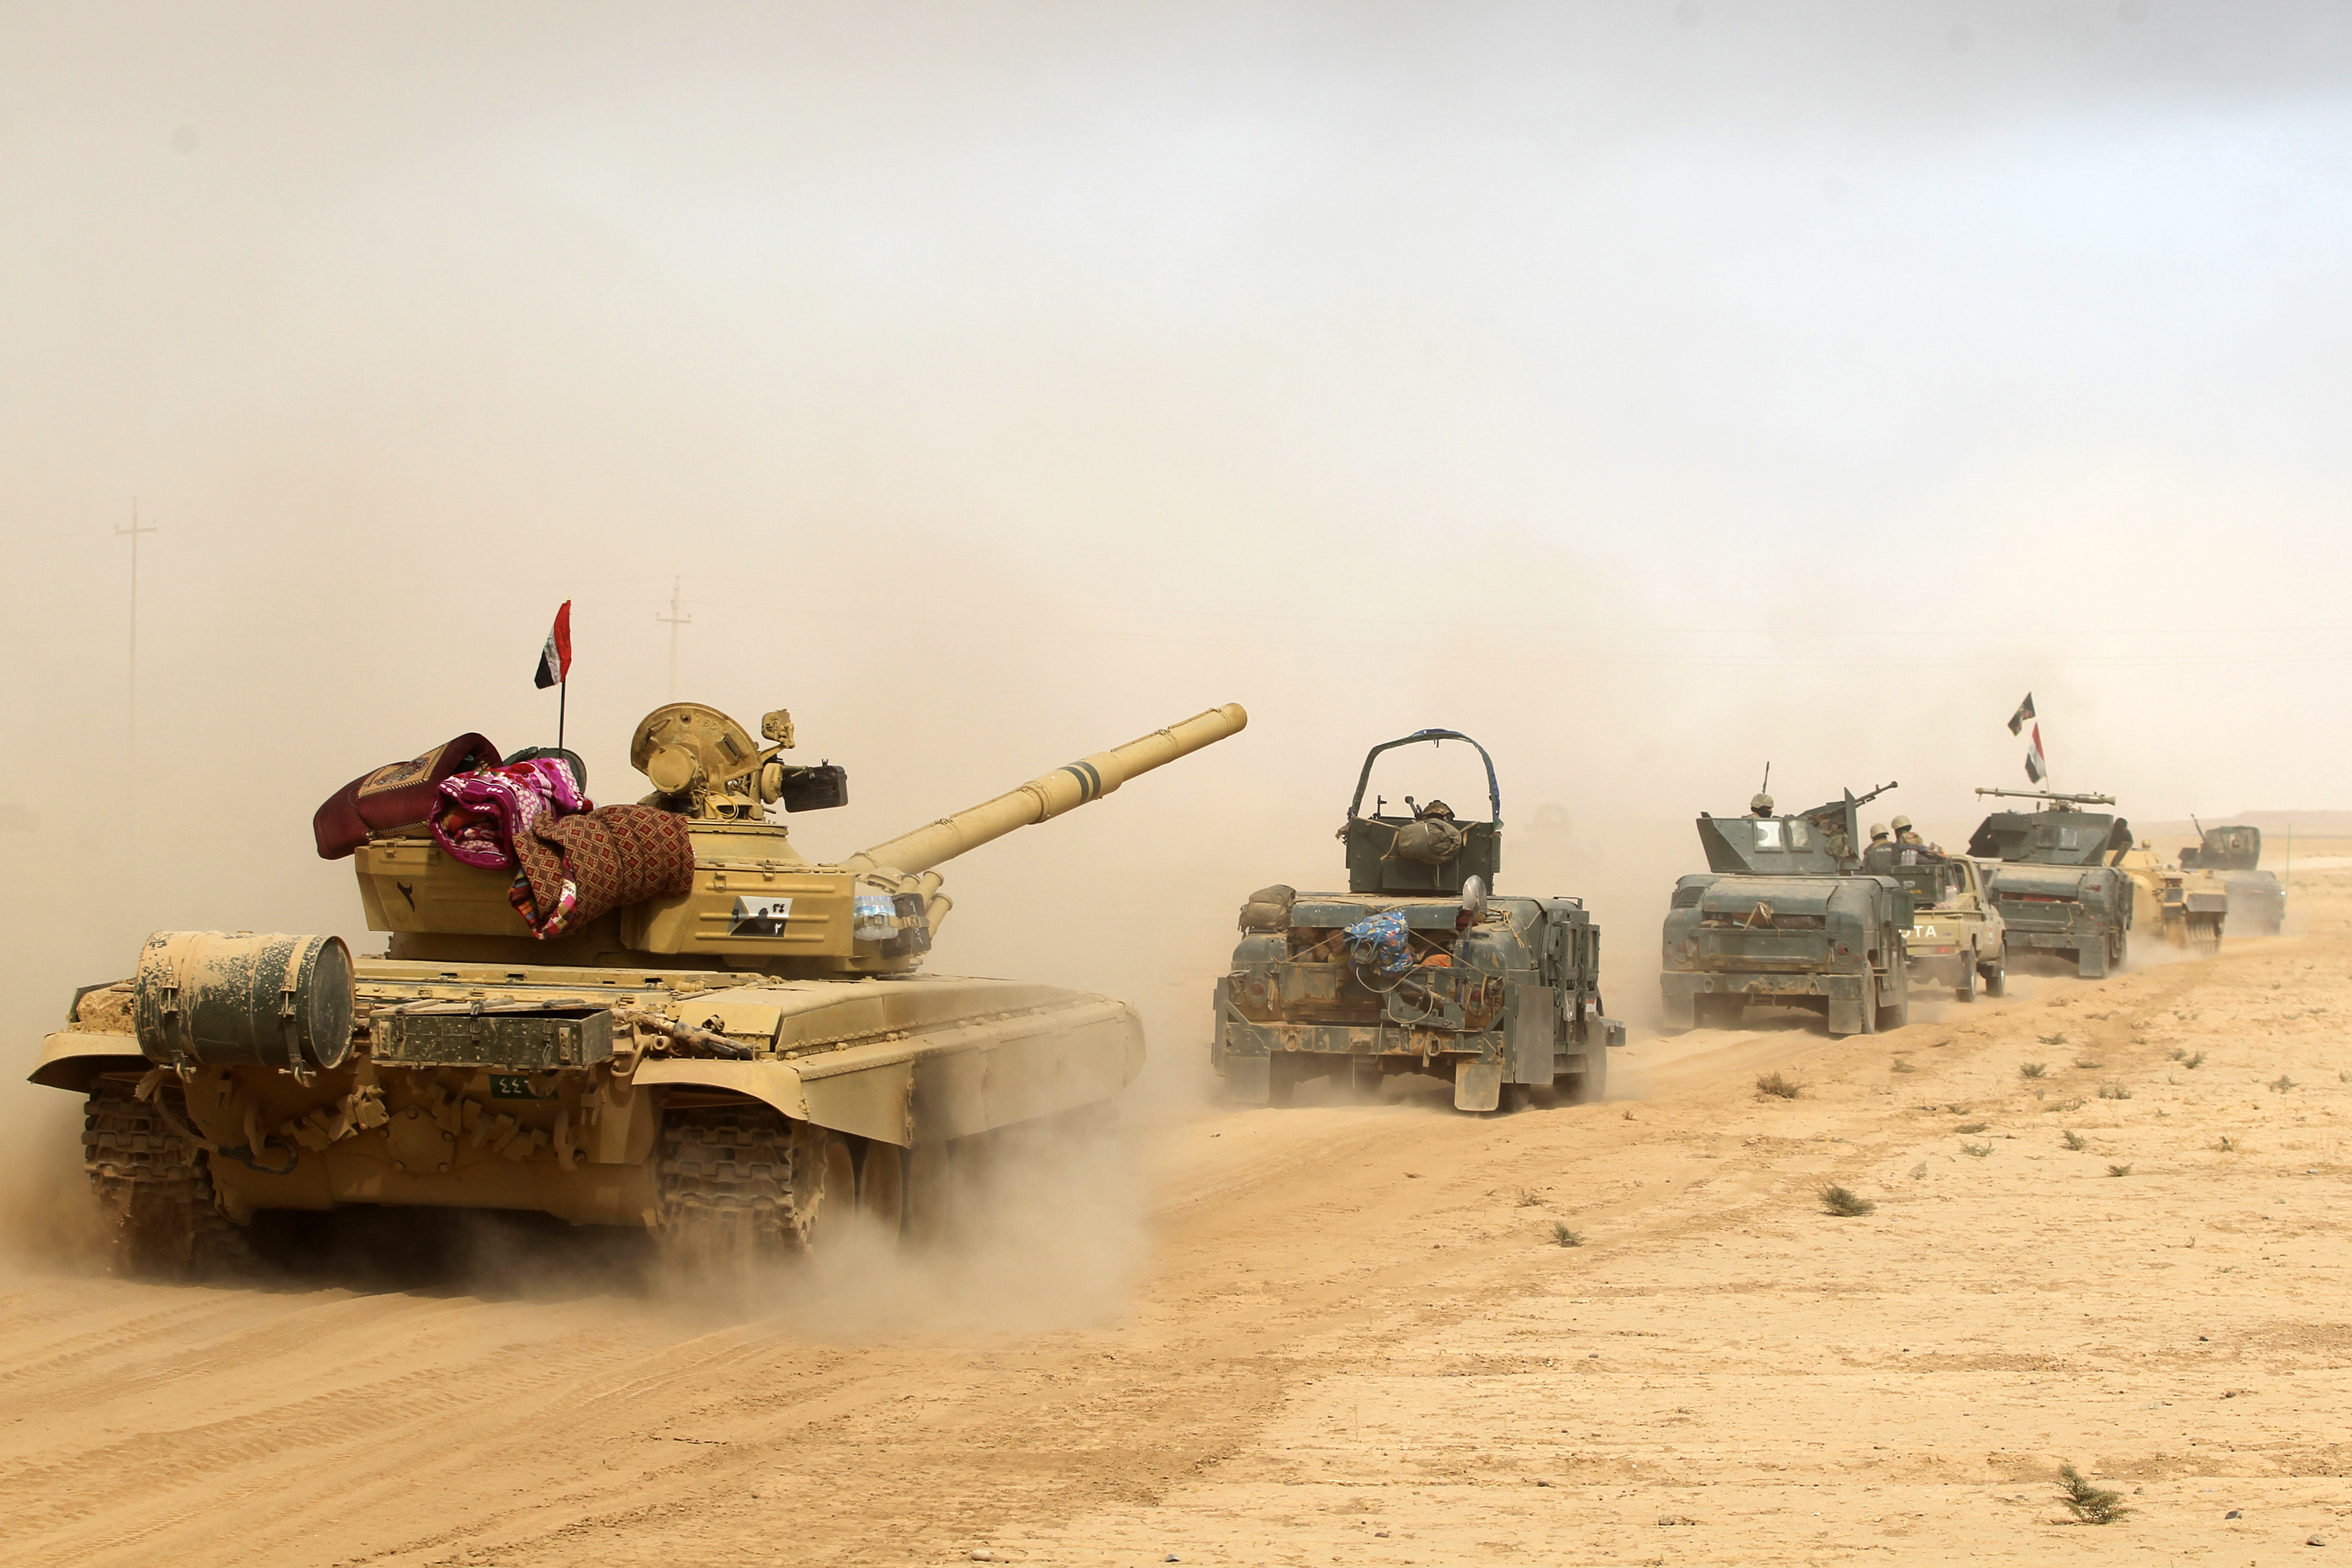 Iraqi forces deploy on October 17, 2016 in the area of al-Shurah, some 45 kms south of Mosul, as they advance towards the city to retake it from the Islamic State (IS) group jihadists. Some 30,000 federal forces are leading the offensive, backed by air and ground support from a 60-nation US-led coalition, in what is expected to be a long and difficult assault on IS's last major Iraqi stronghold.  / AFP PHOTO / AHMAD AL-RUBAYE